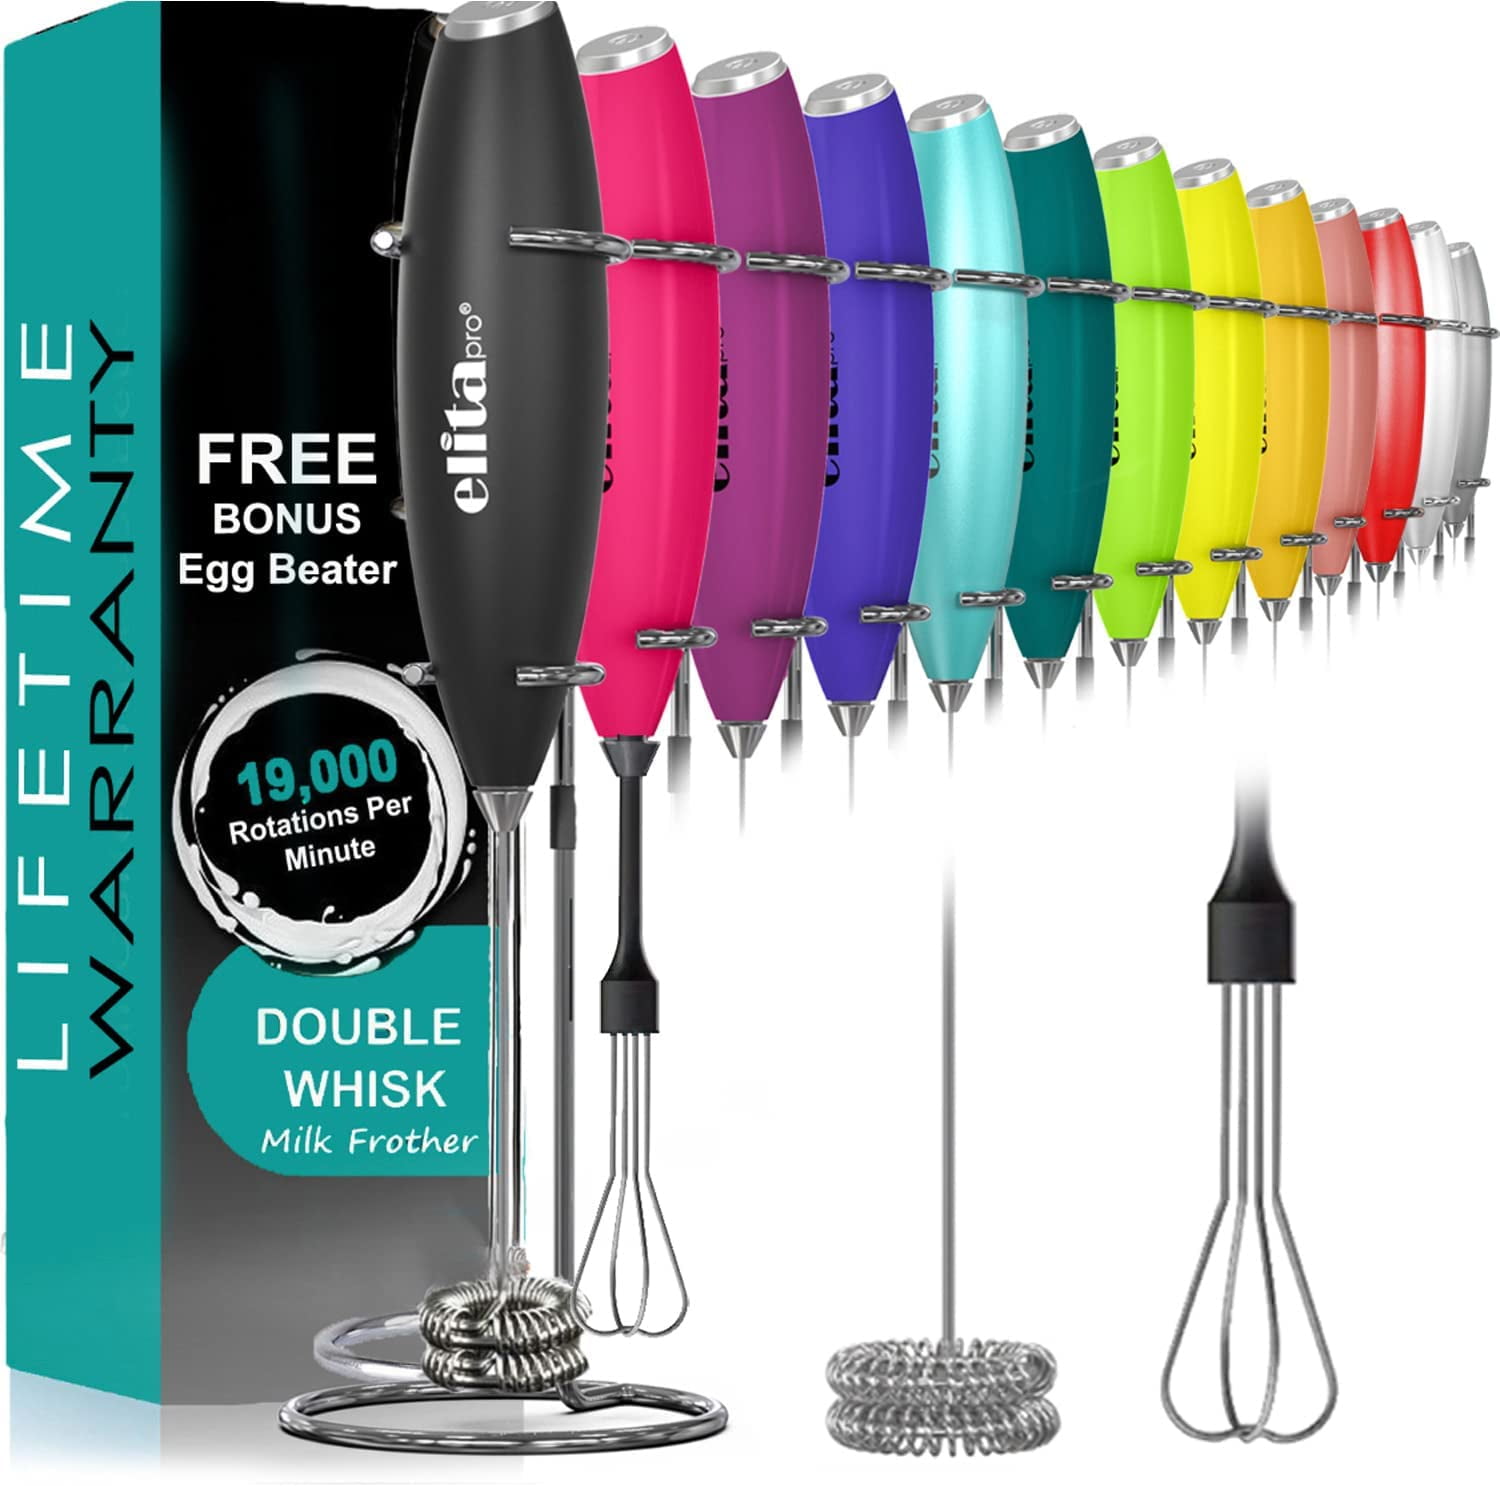 Double Whisk Drink Mixer, Electric Milk Frother